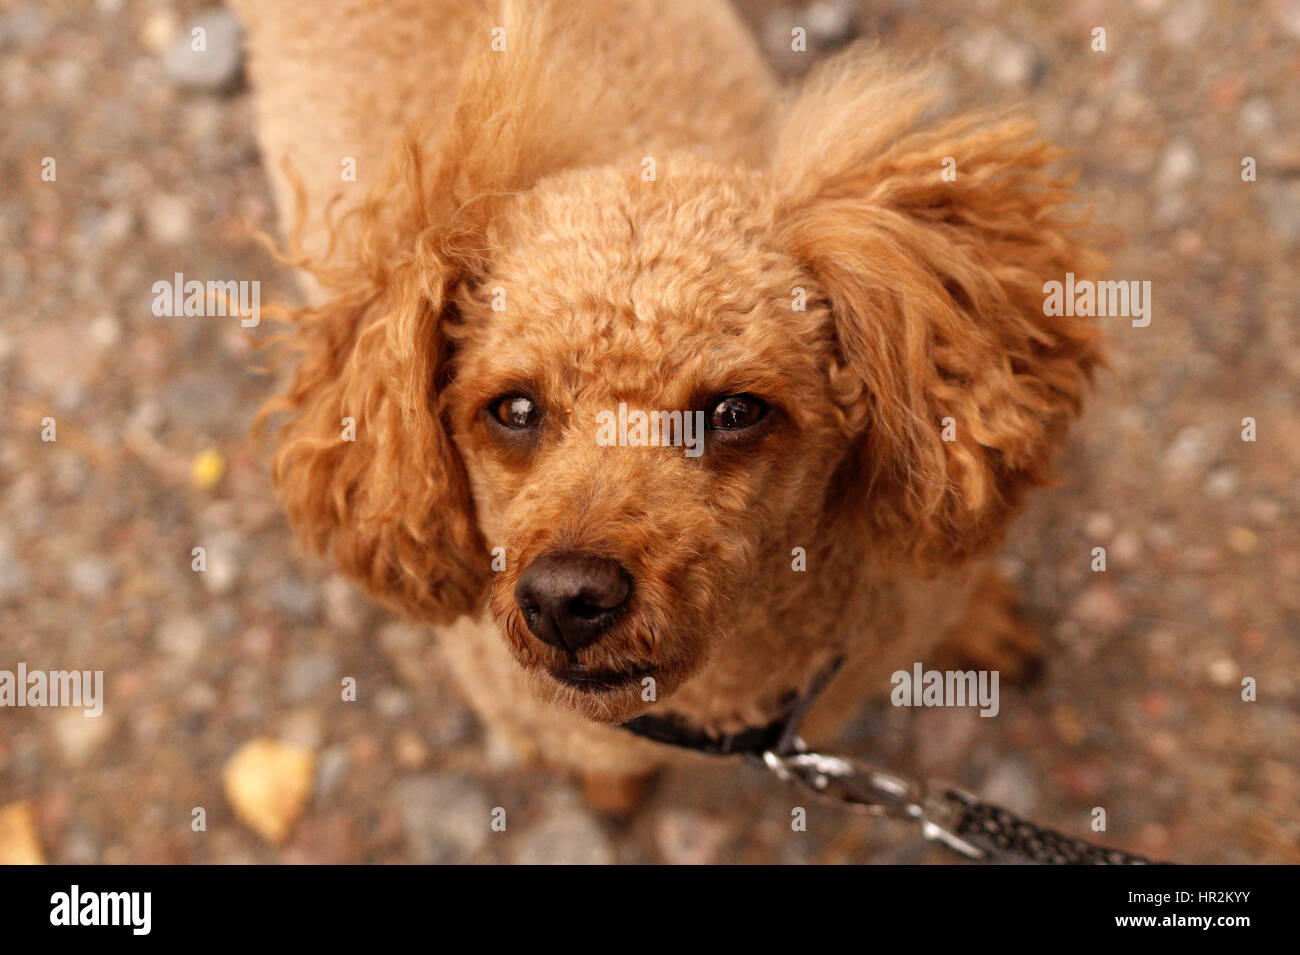 https://c8.alamy.com/comp/HR2KYY/cute-poodle-looking-at-the-camera-HR2KYY.jpg